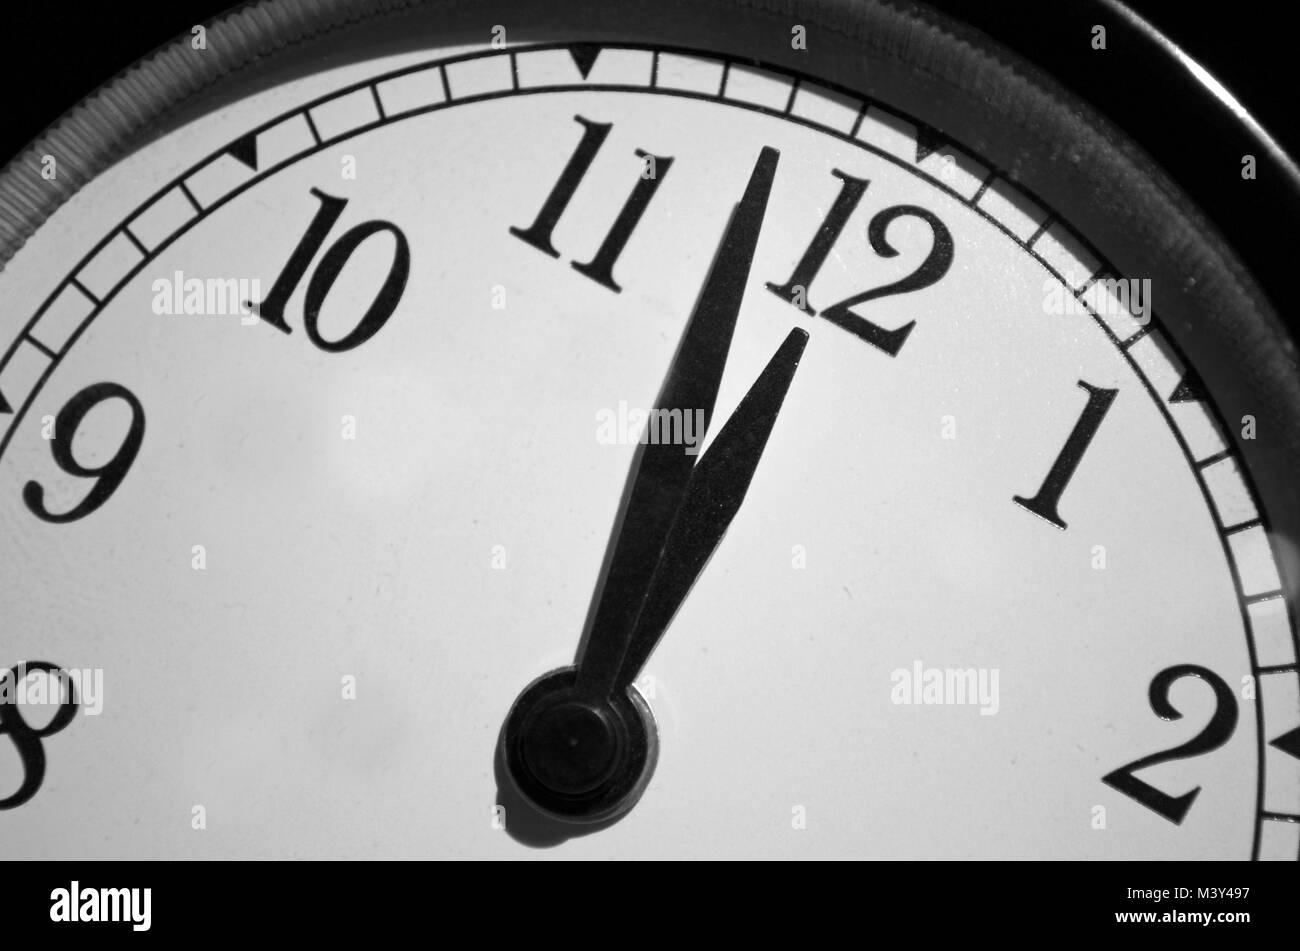 Doomsday Clock Set at Two Minutes To Midnight Stock Photo